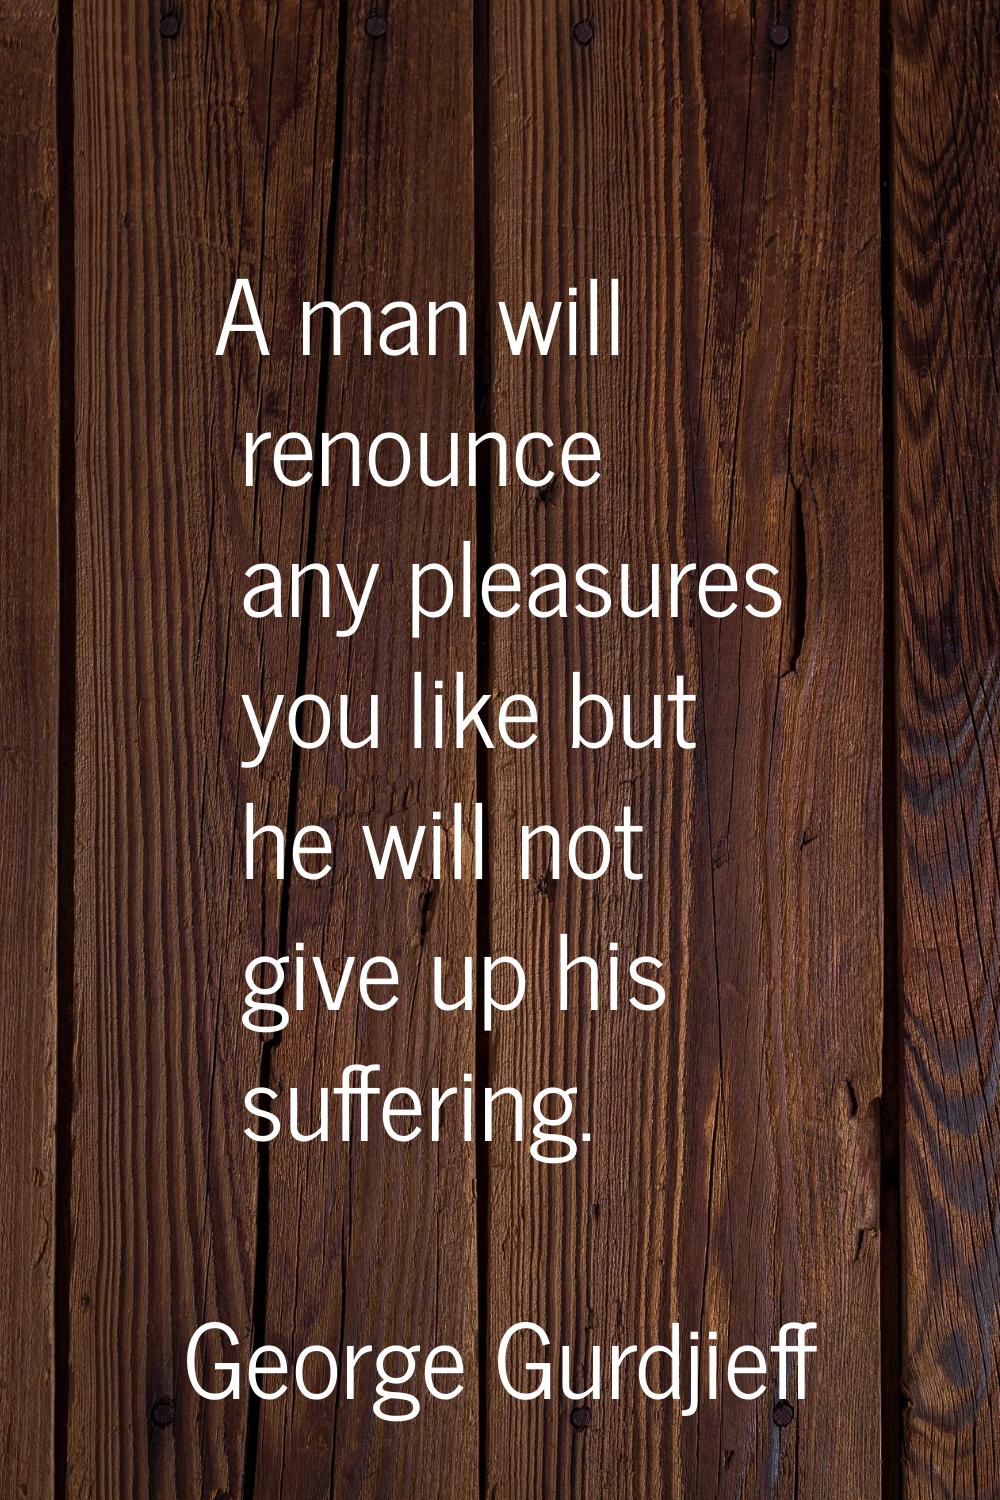 A man will renounce any pleasures you like but he will not give up his suffering.